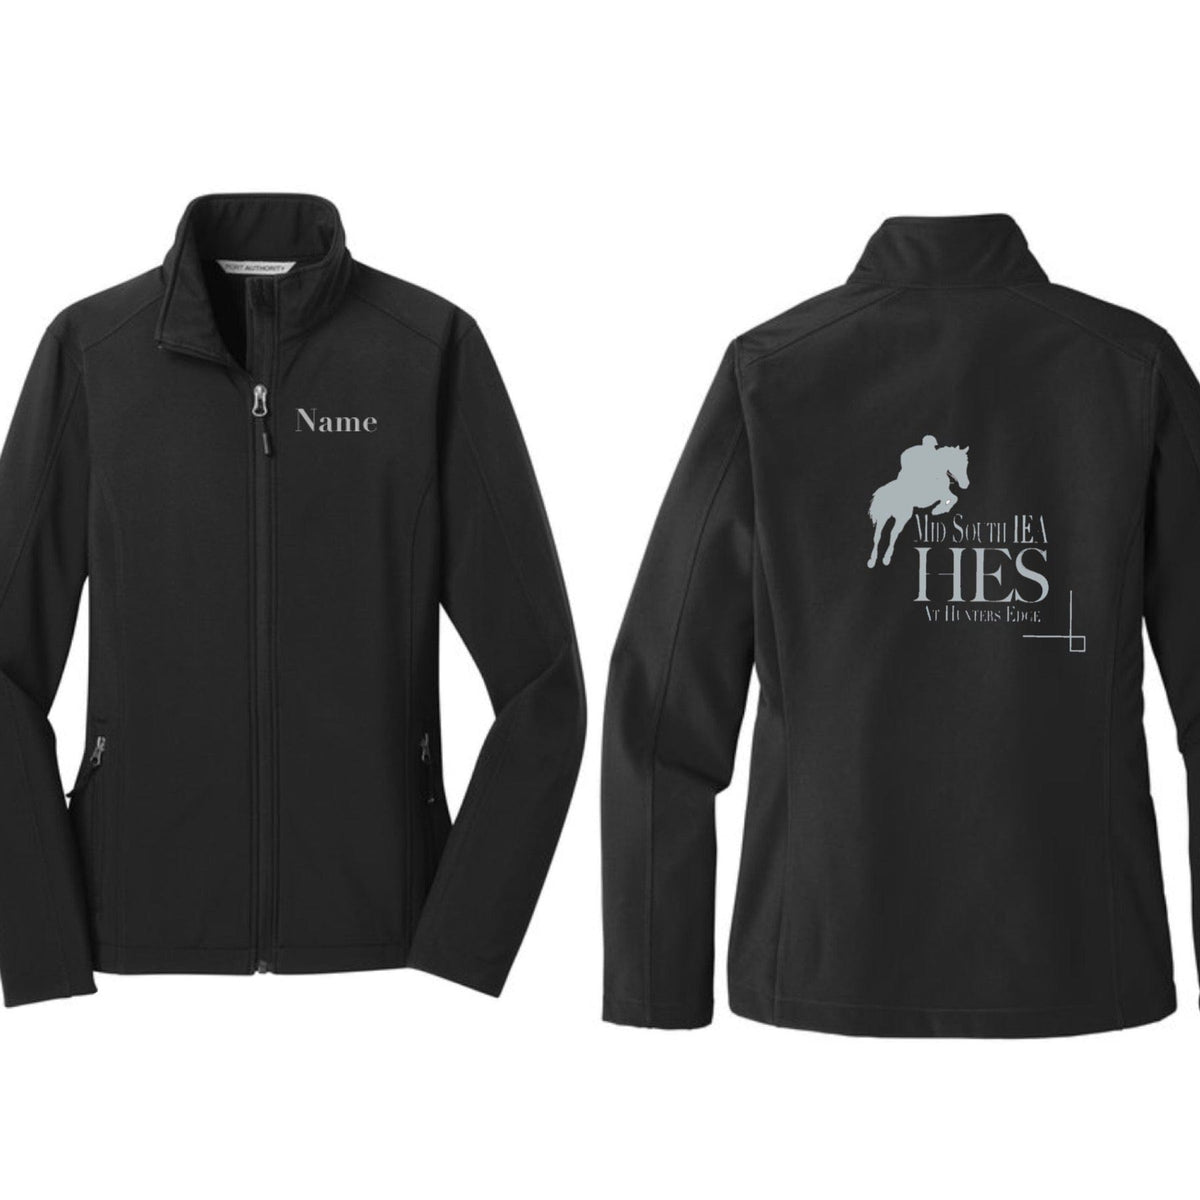 Equestrian Team Apparel HES IEA Shell Jacket and Vest equestrian team apparel online tack store mobile tack store custom farm apparel custom show stable clothing equestrian lifestyle horse show clothing riding clothes horses equestrian tack store